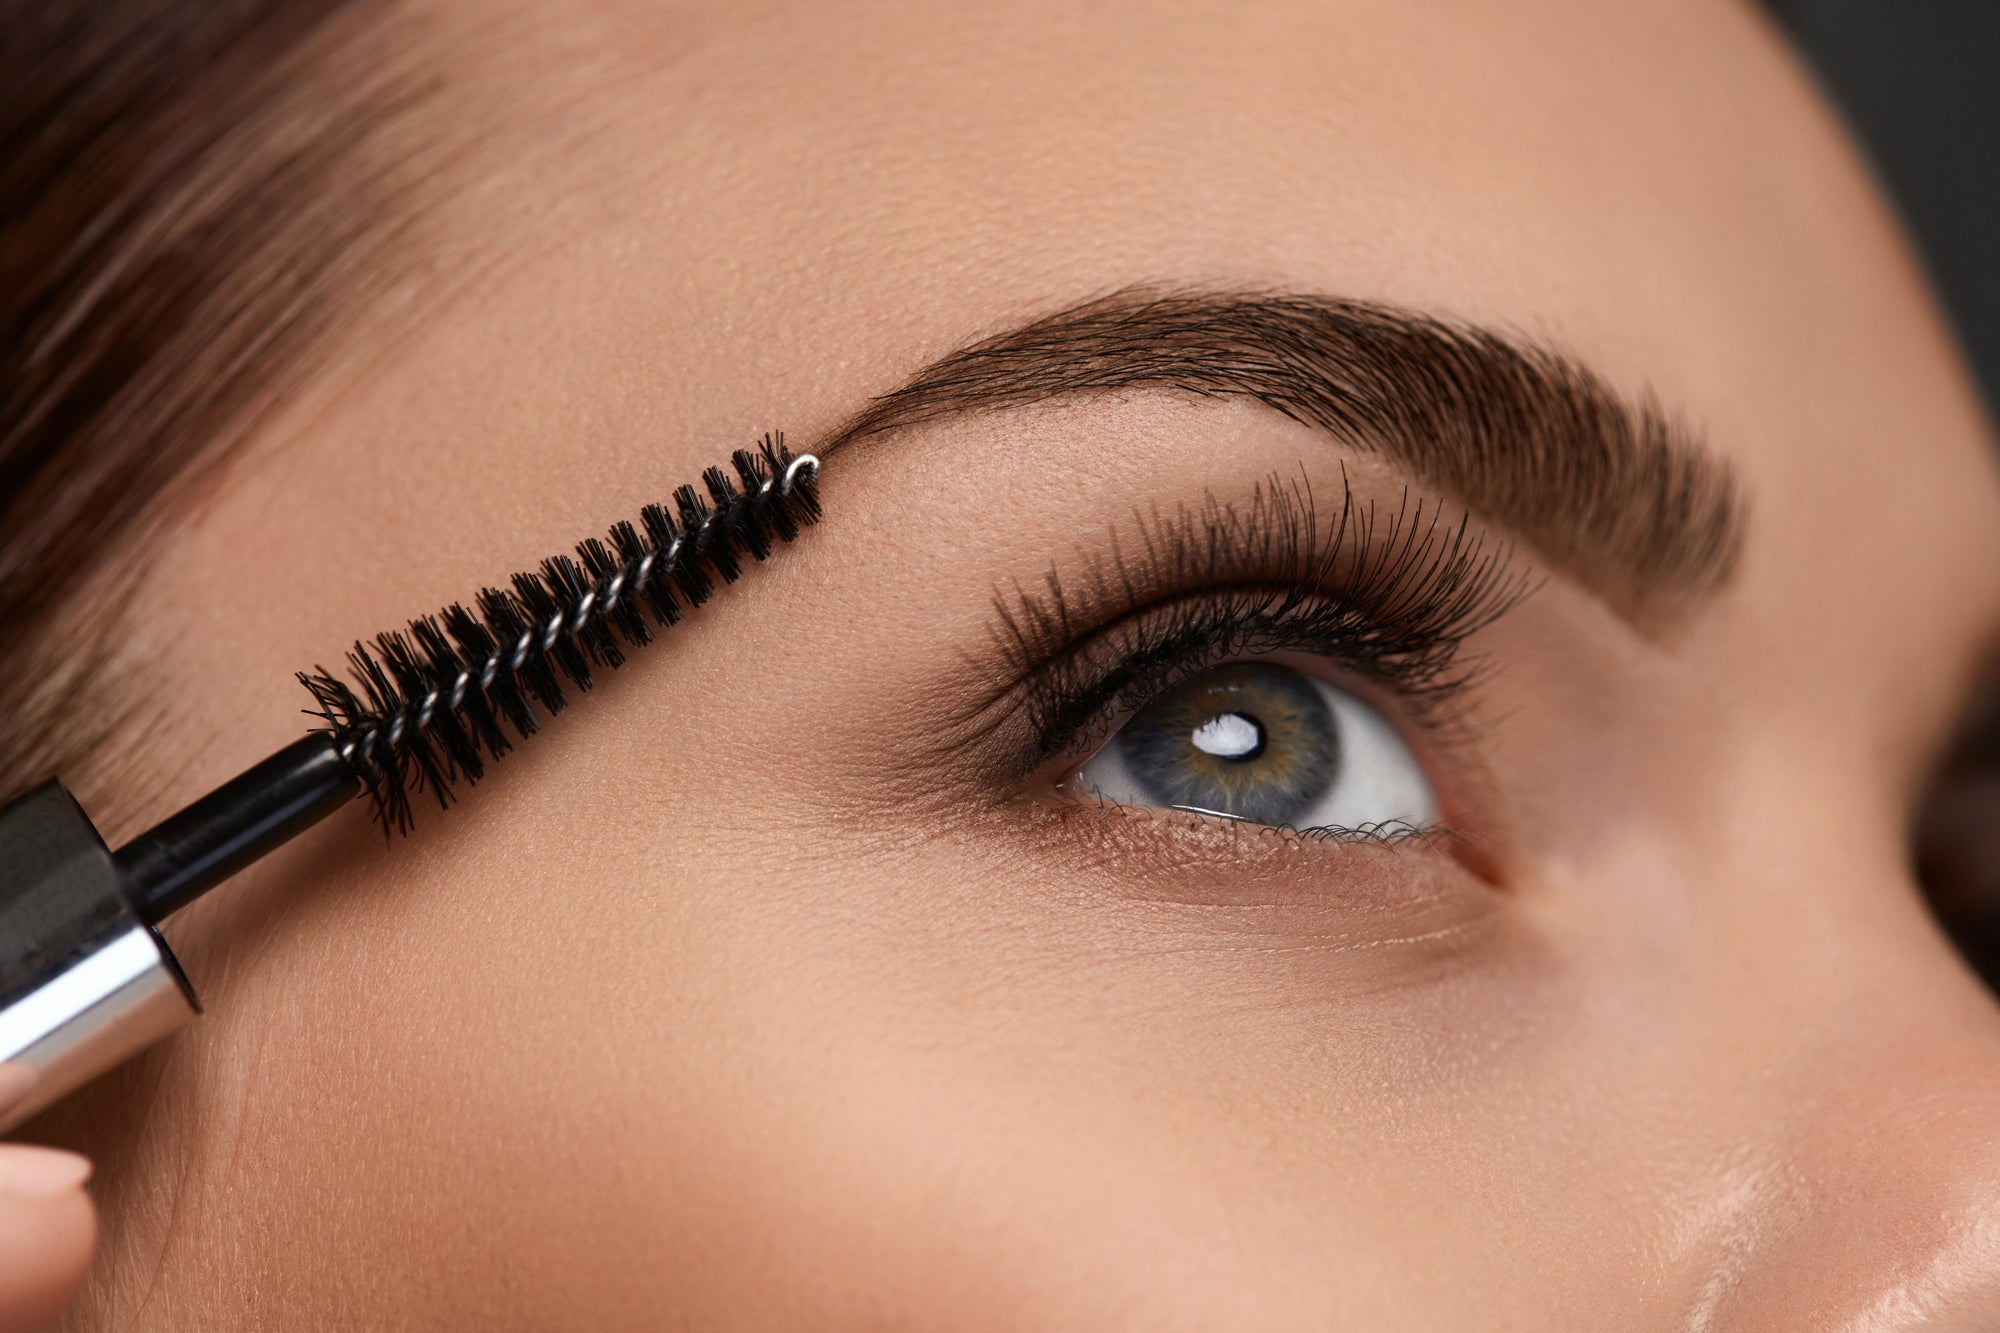 Brow Fiber Gel: What Is It And How Does It Work?